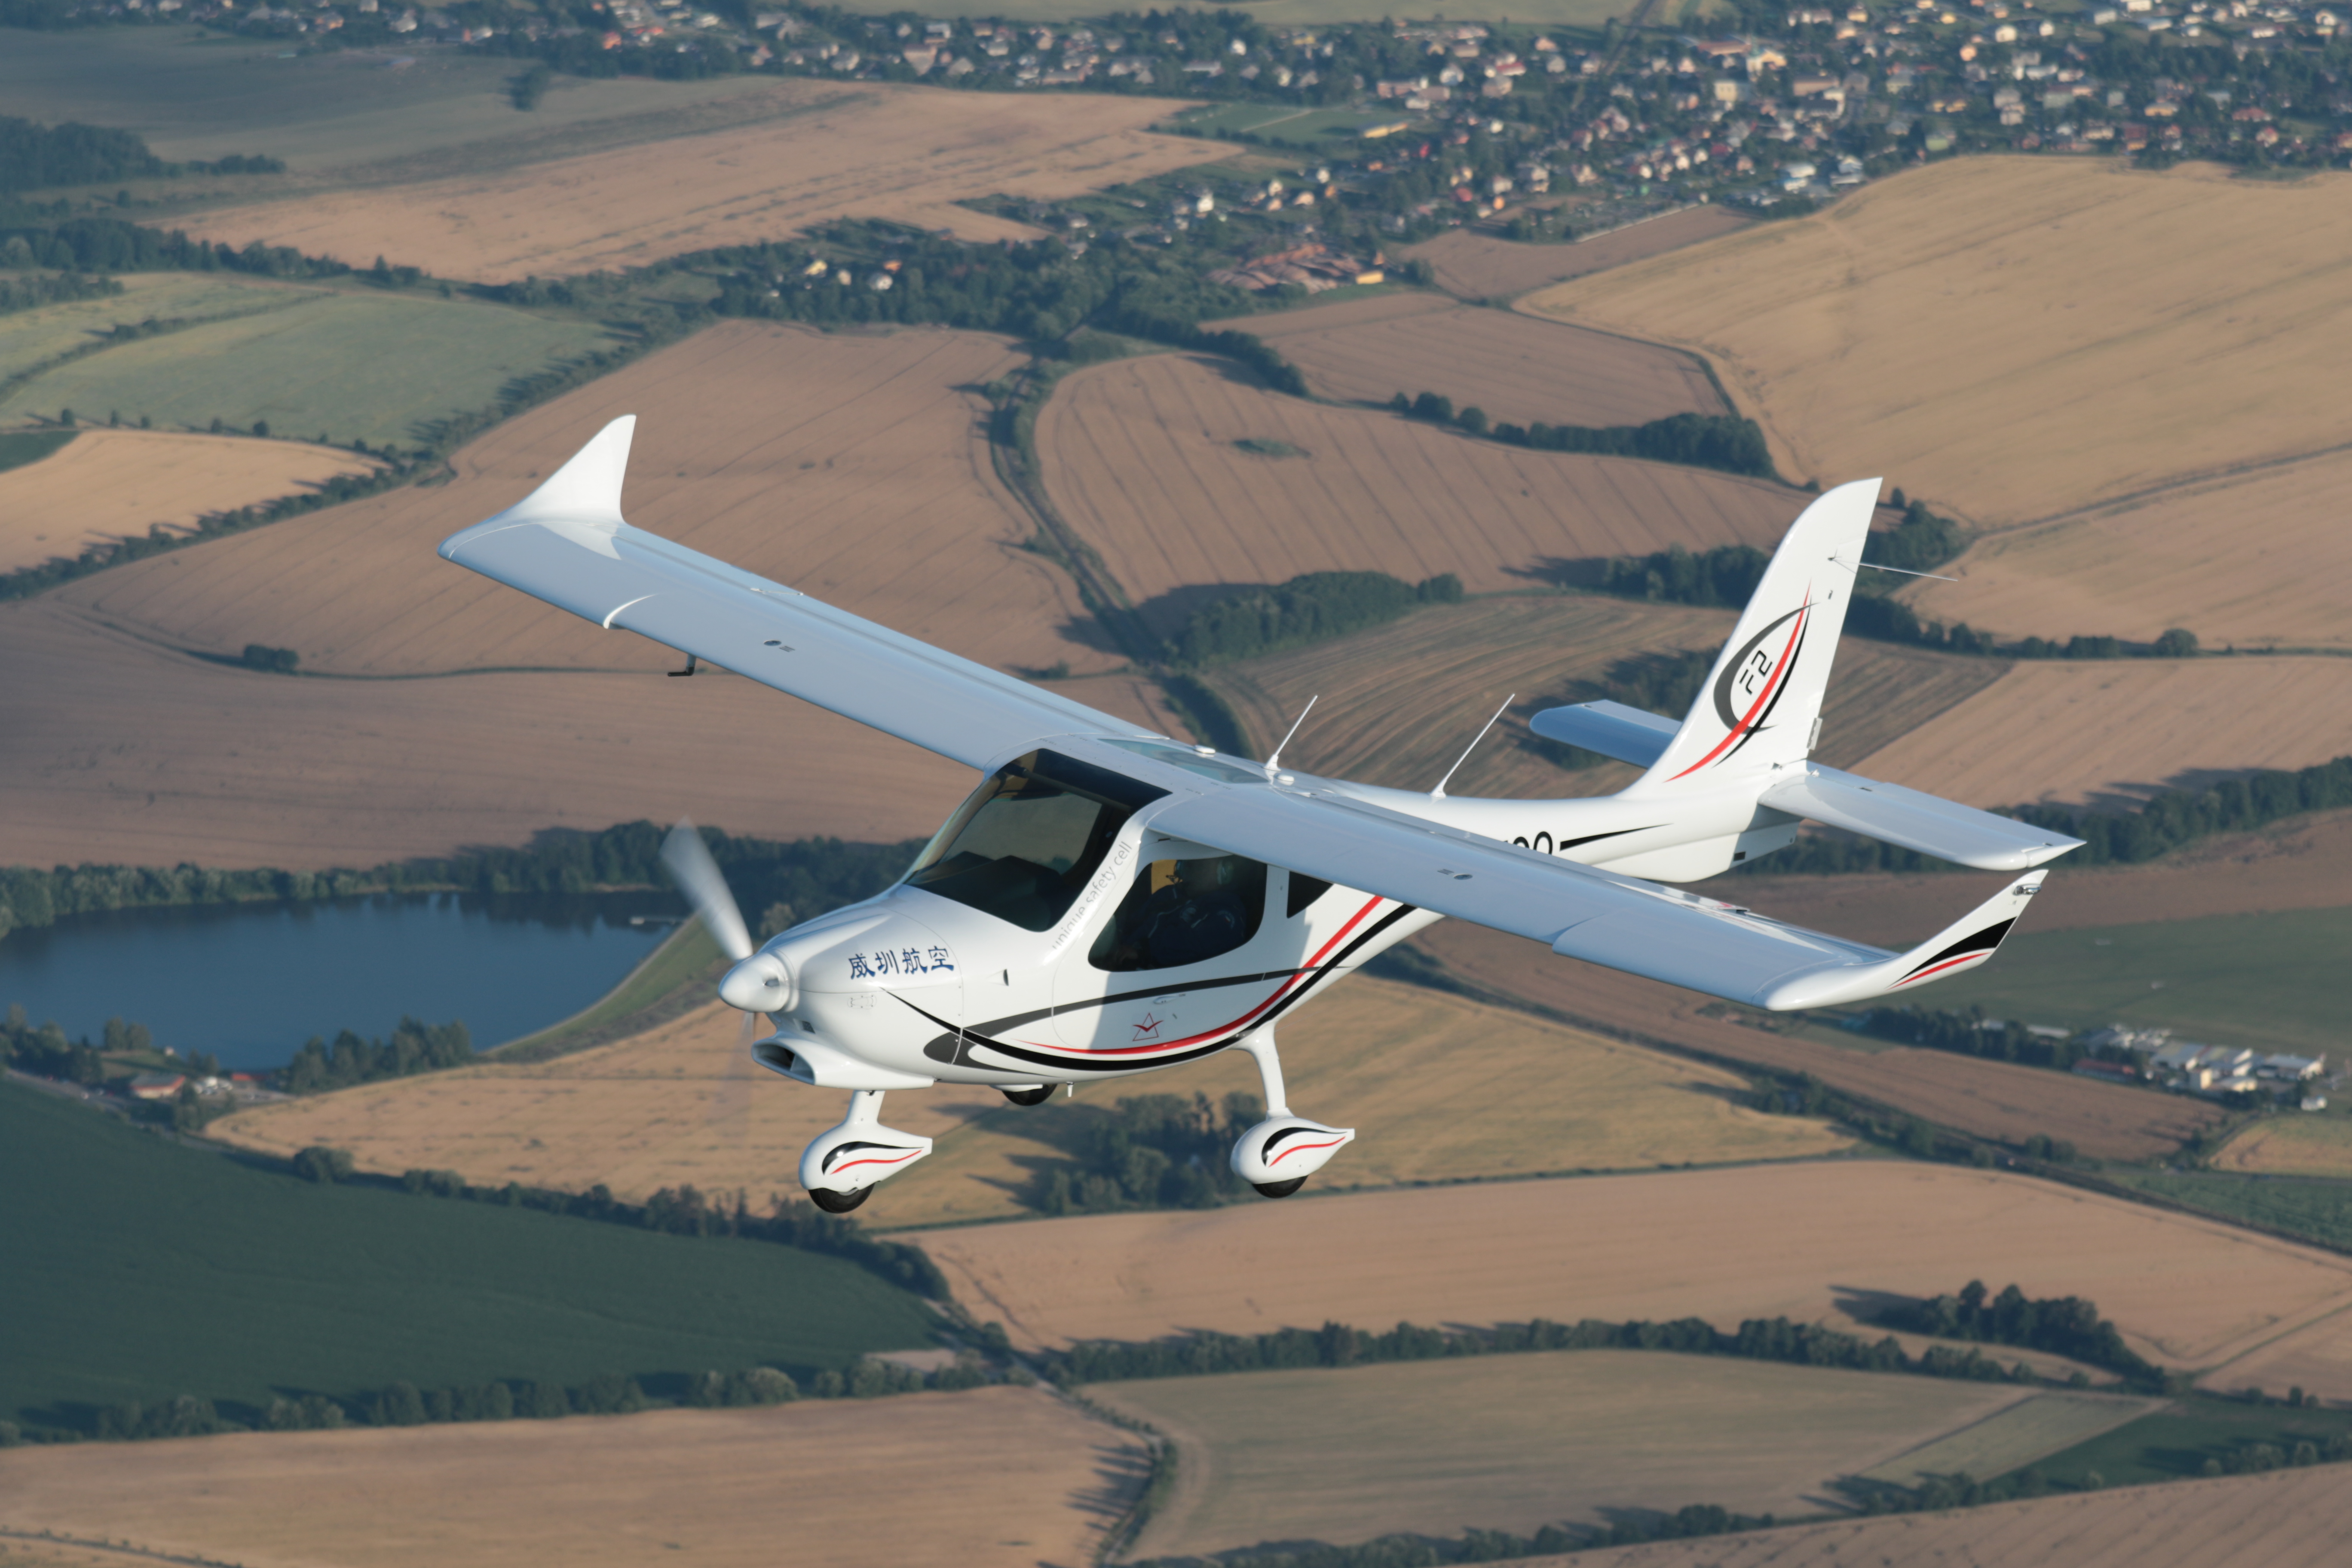 Hexcel has supplied a range of low-temperature curing prepreg to make a light aircraft.